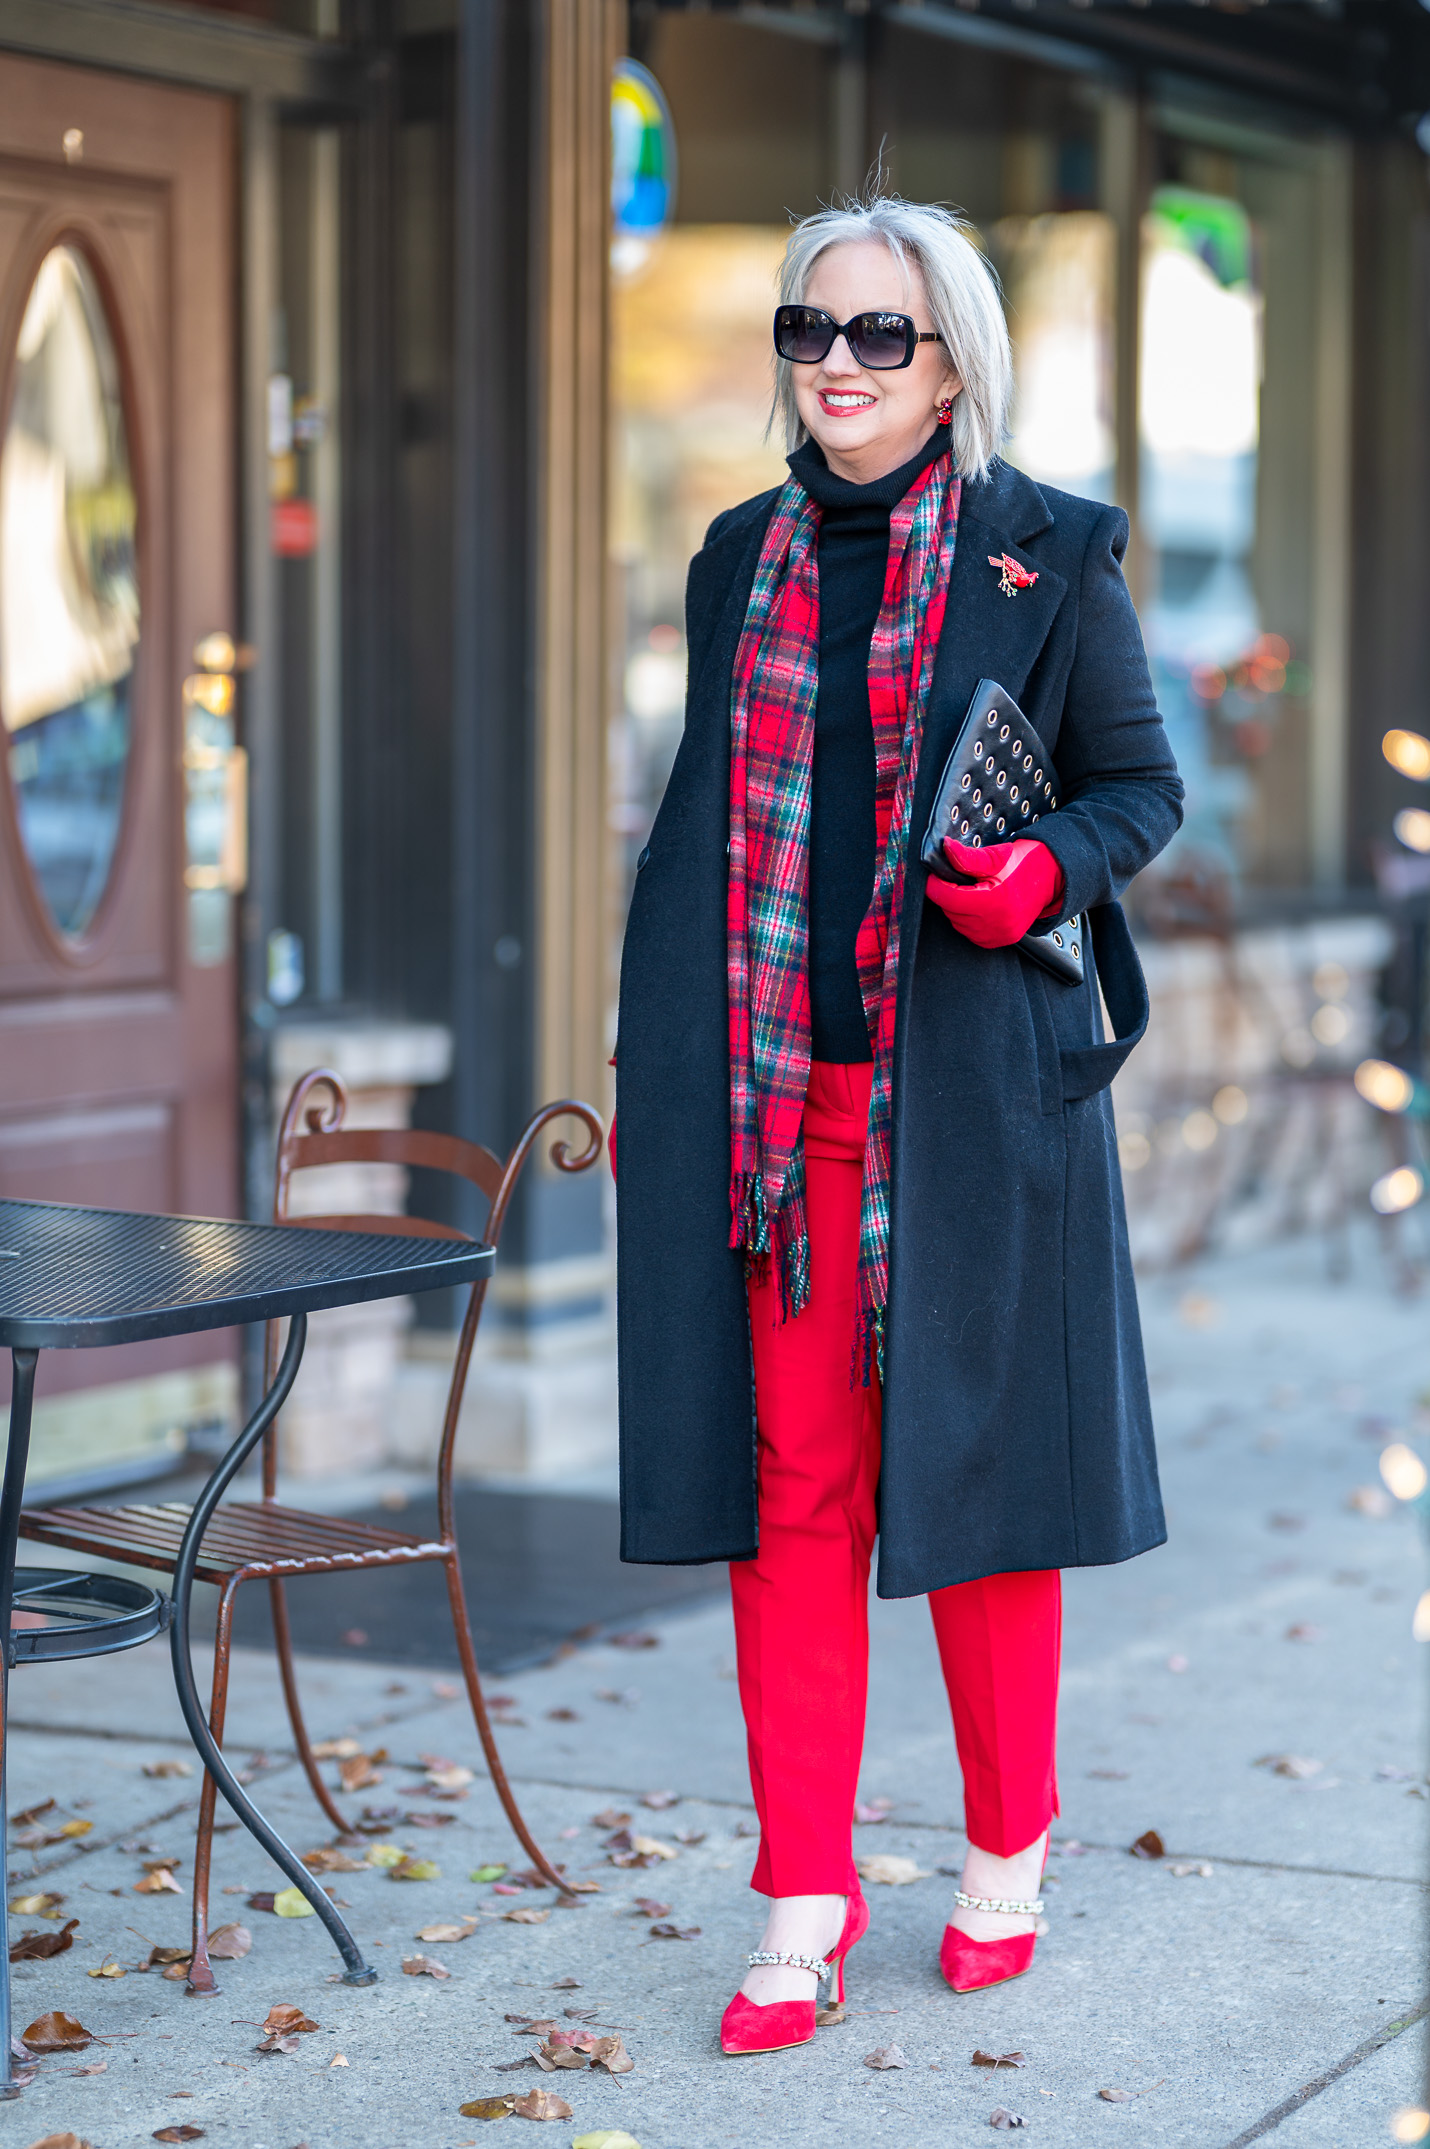 Red and Black Outfit for Daytime